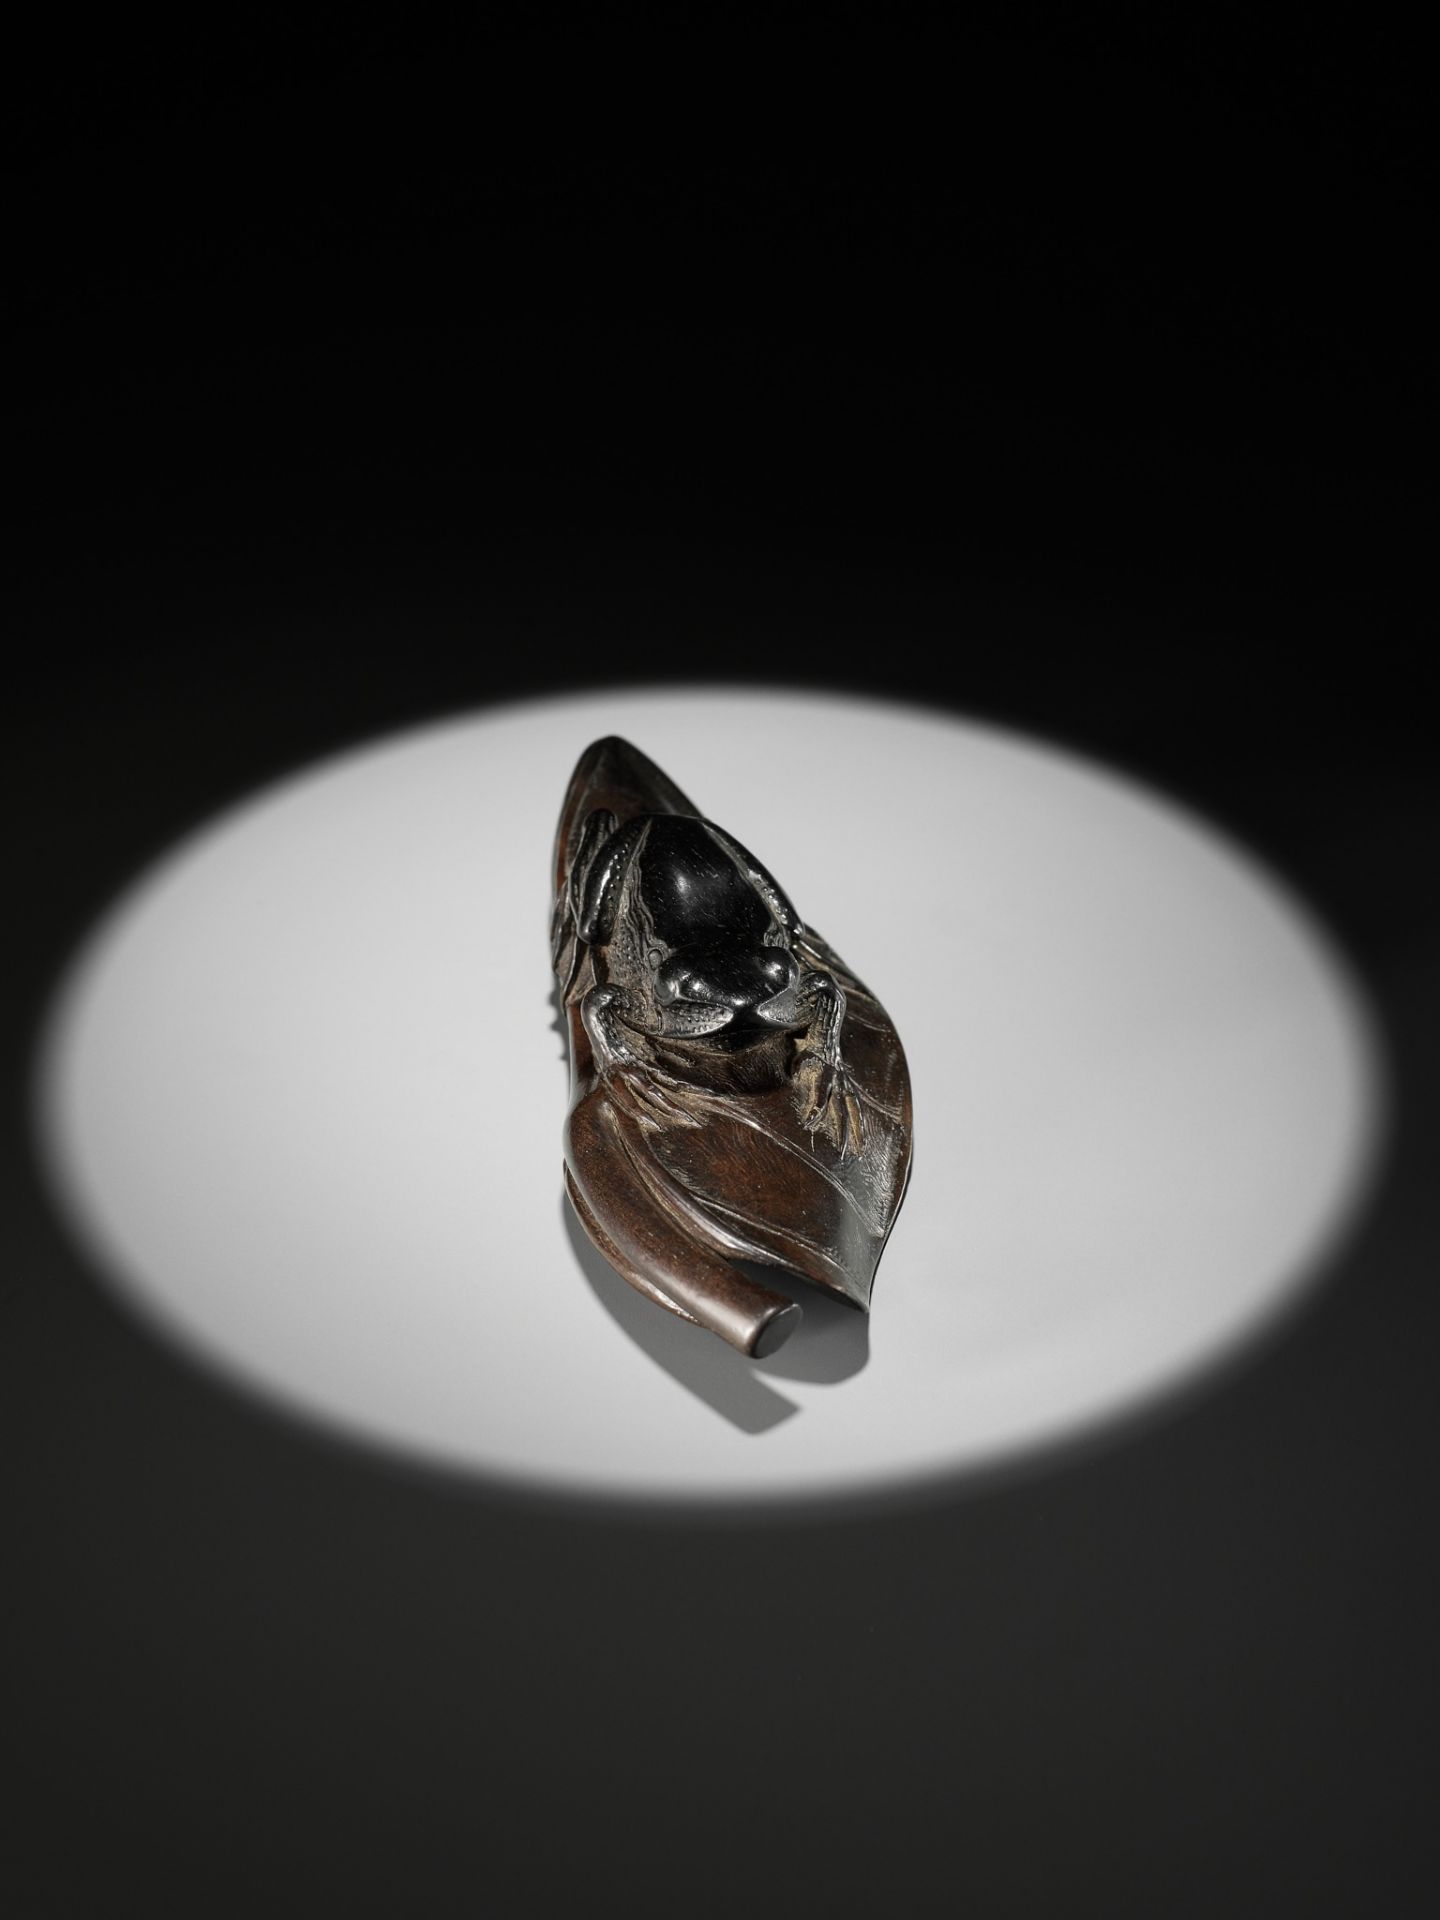 KANMAN: AN EXCEPTIONAL AND LARGE KUROGAKI (BLACK PERSIMMON) WOOD NETSUKE OF A FROG ON A LOTUS LEAF - Image 16 of 20